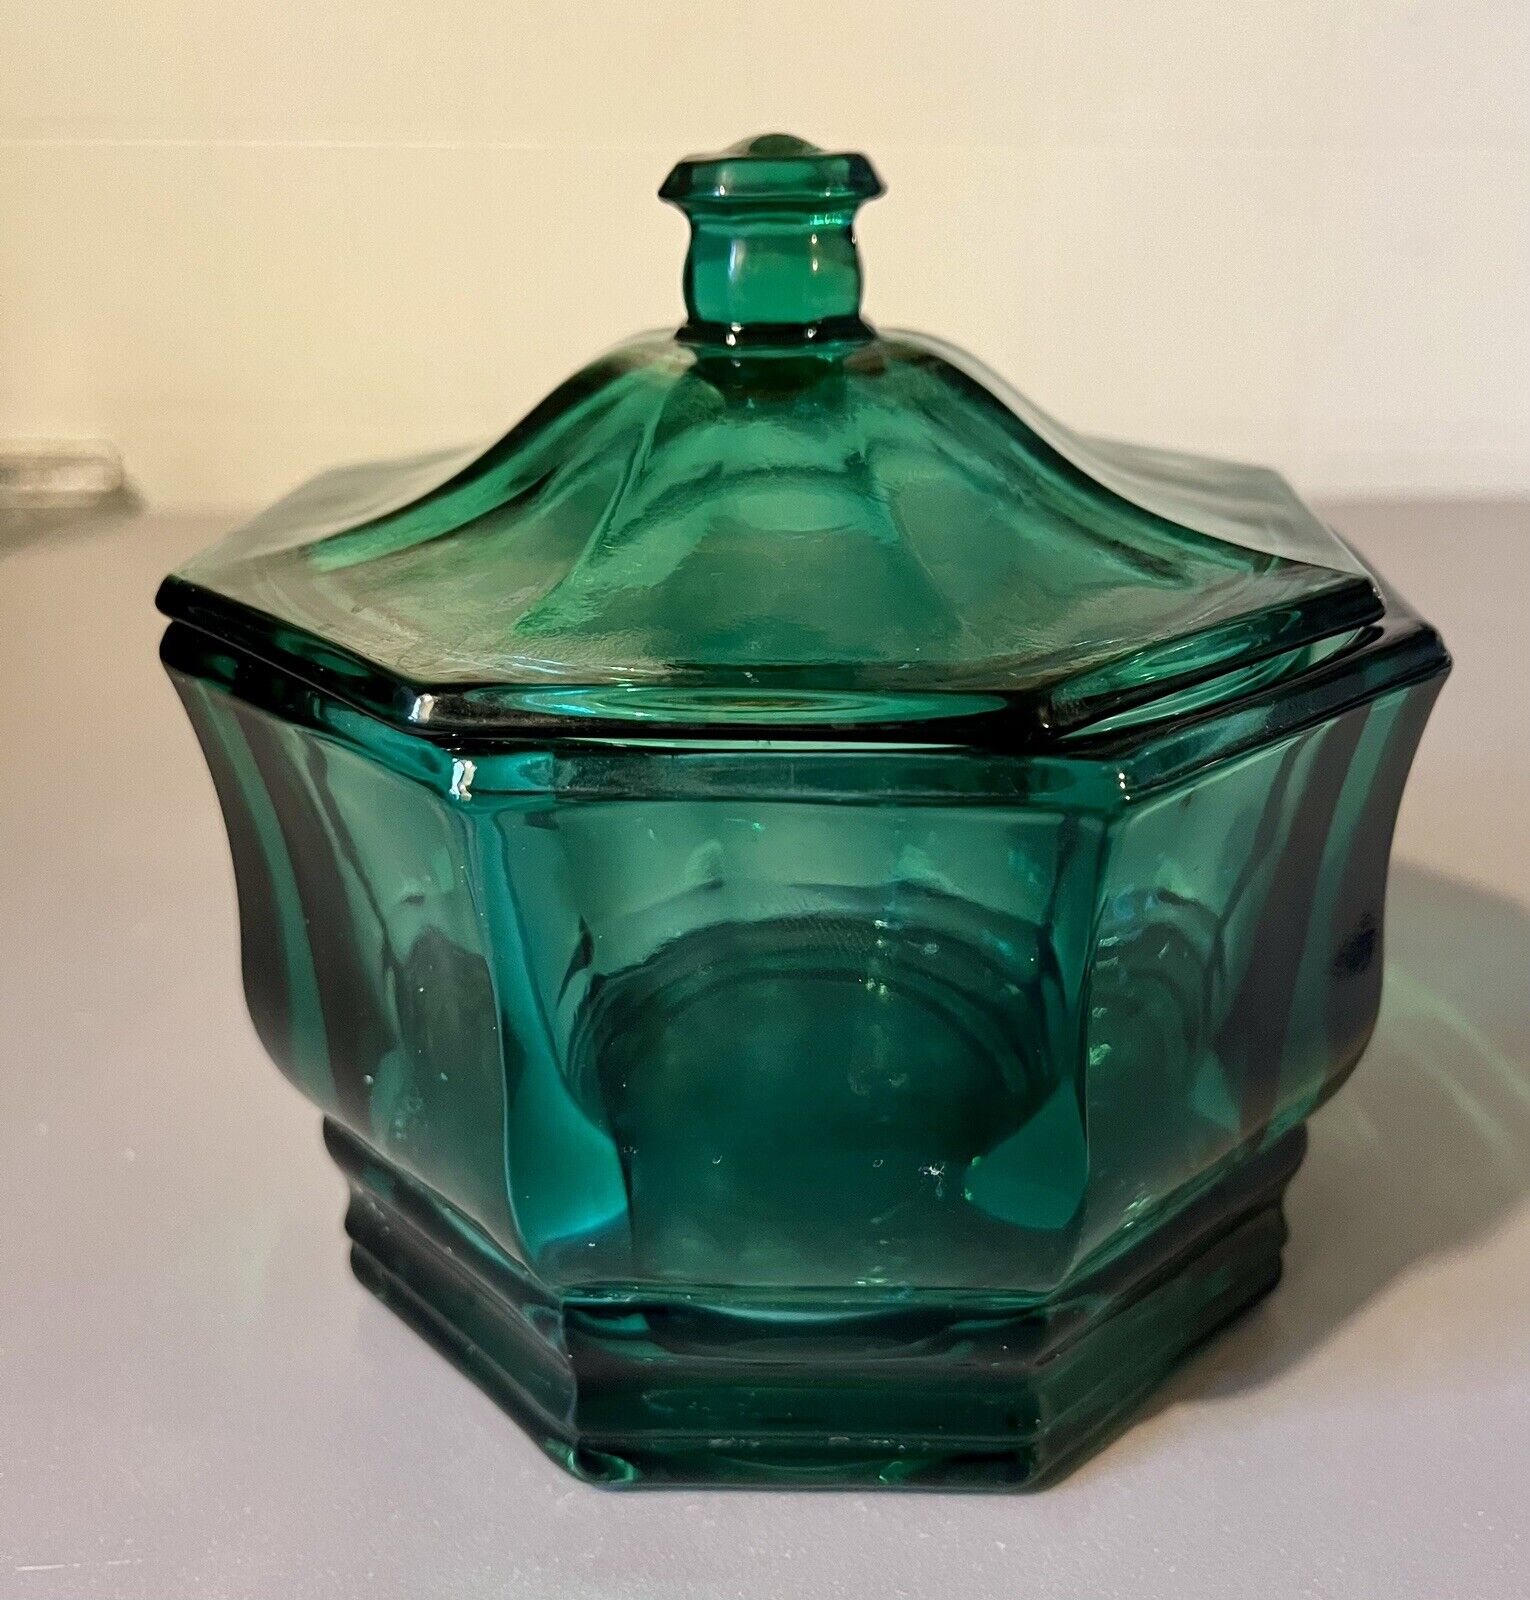 Vintage Teal Green Indiana Glass Candy Jar Dish Covered Octagon